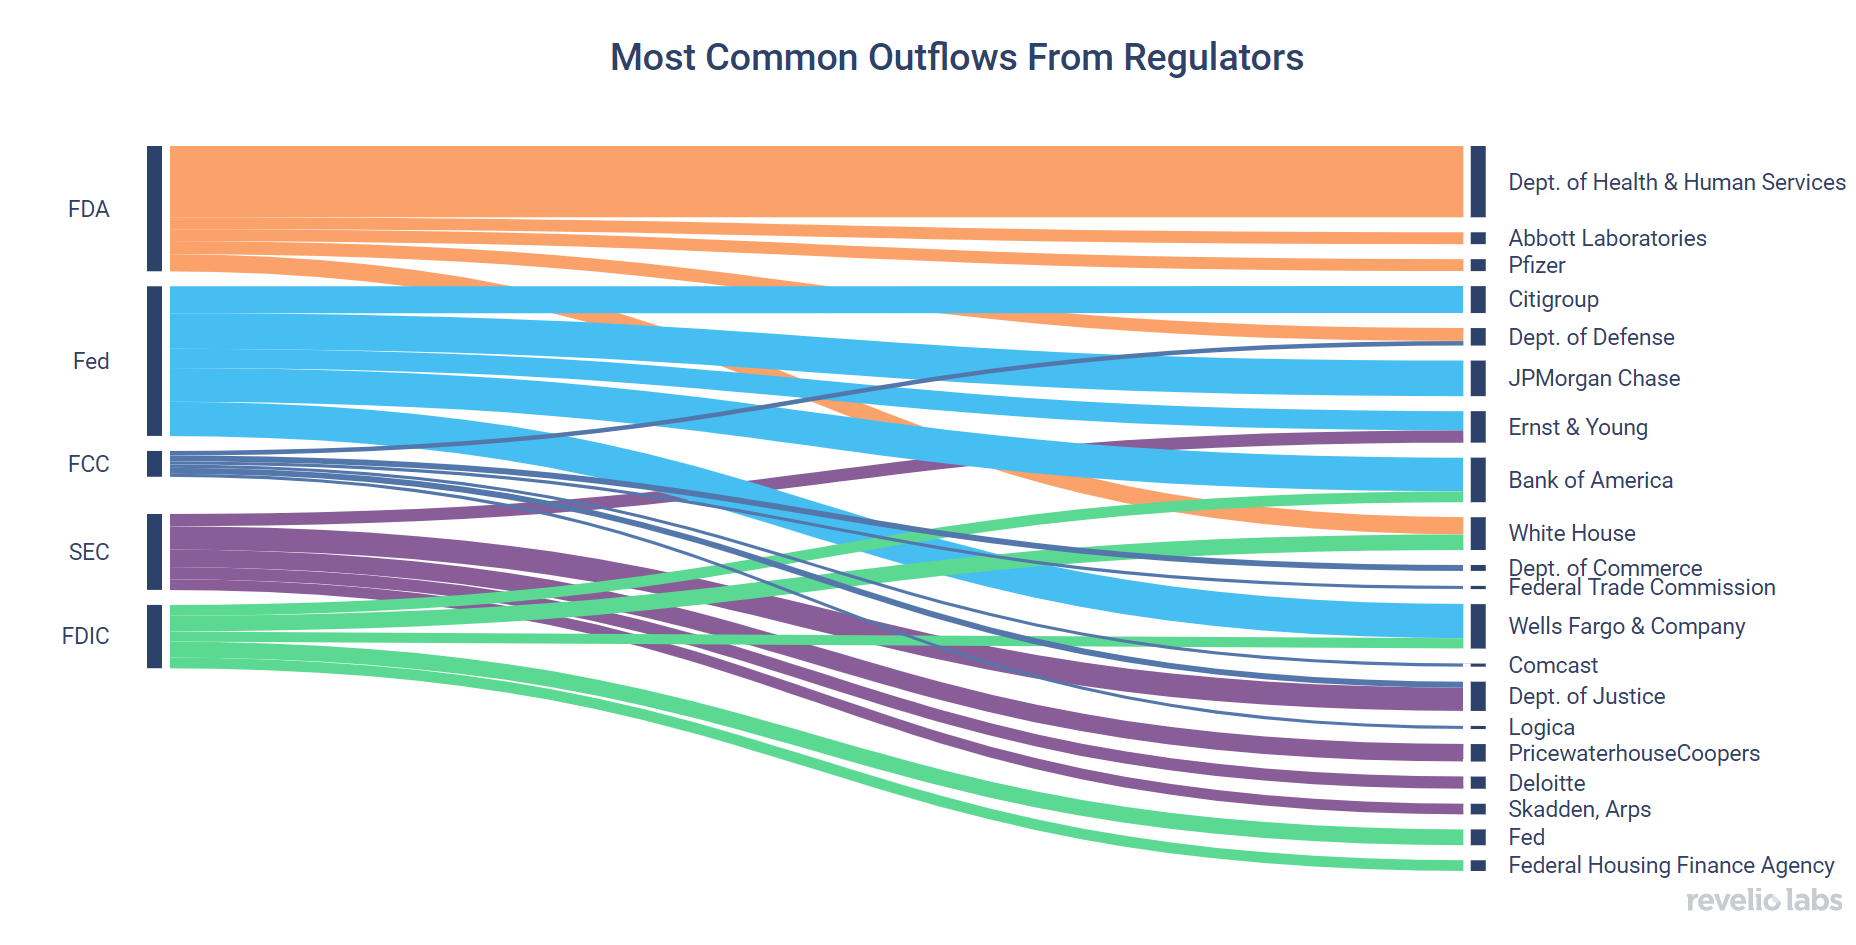 Most Common Outflows from Regulators